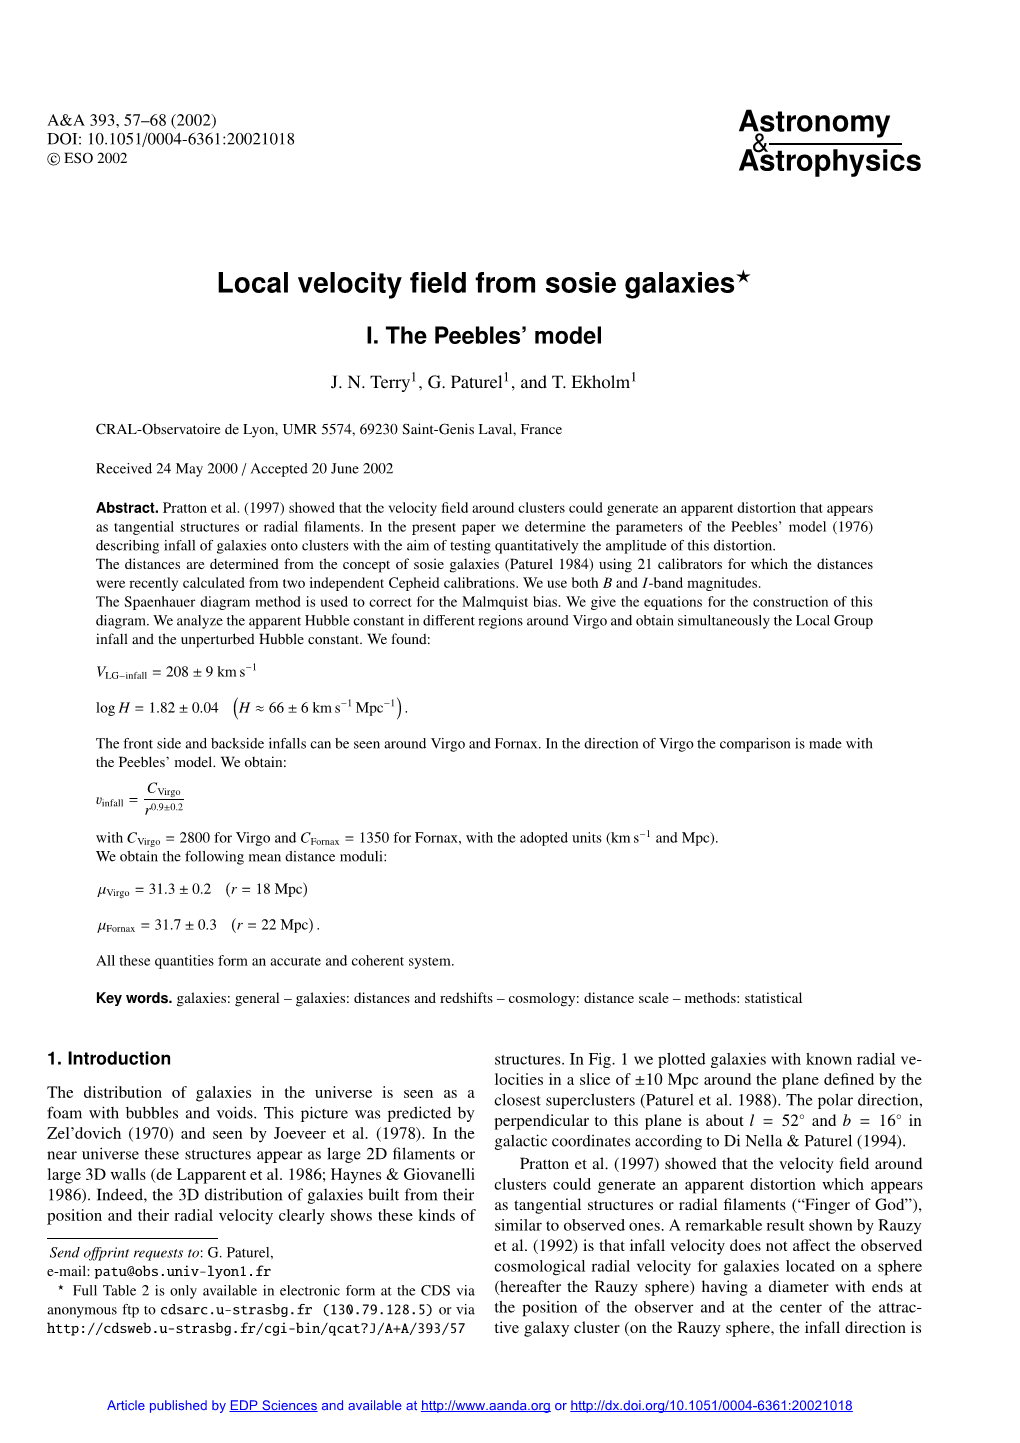 Local Velocity Field from Sosie Galaxies